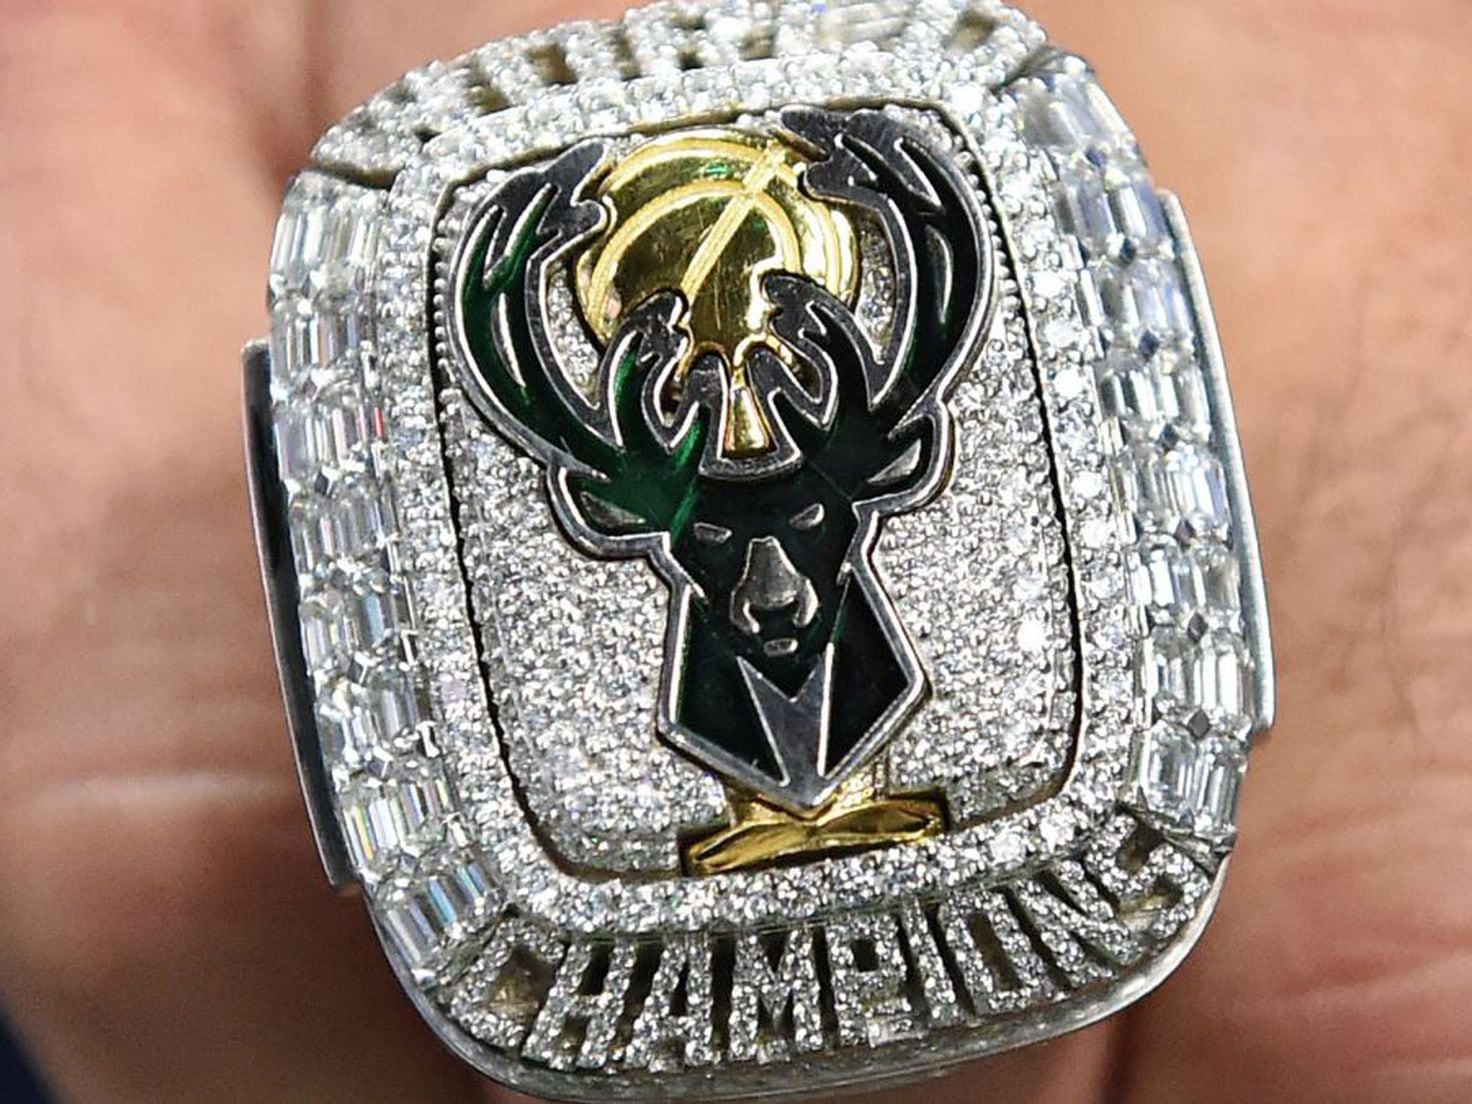 NBA championship rings: how worth, they're made of and who gets - AS USA